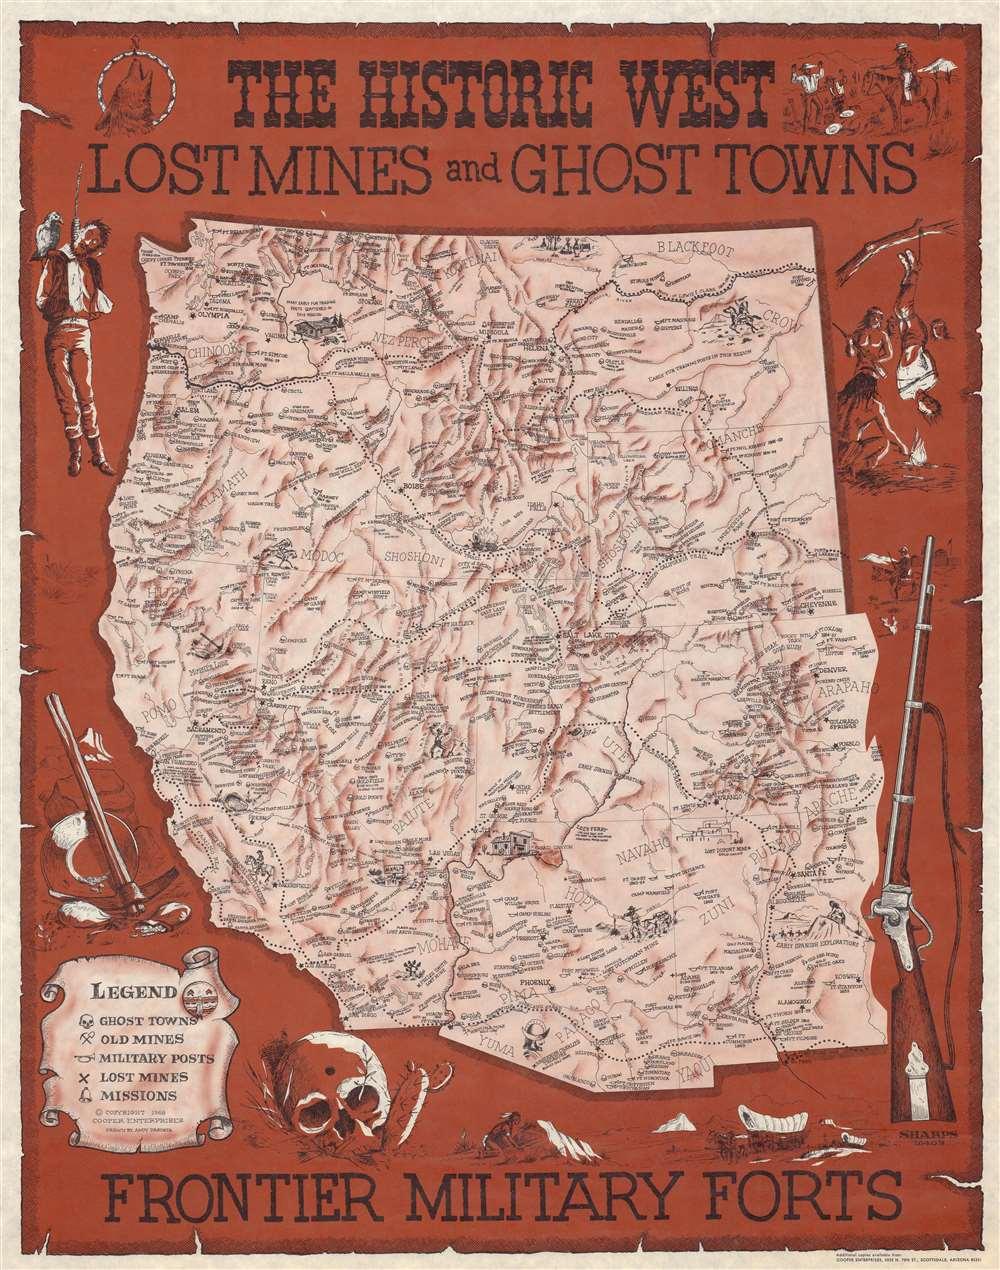 The Historic West. Lost Mines and Ghost Towns, Frontier Military